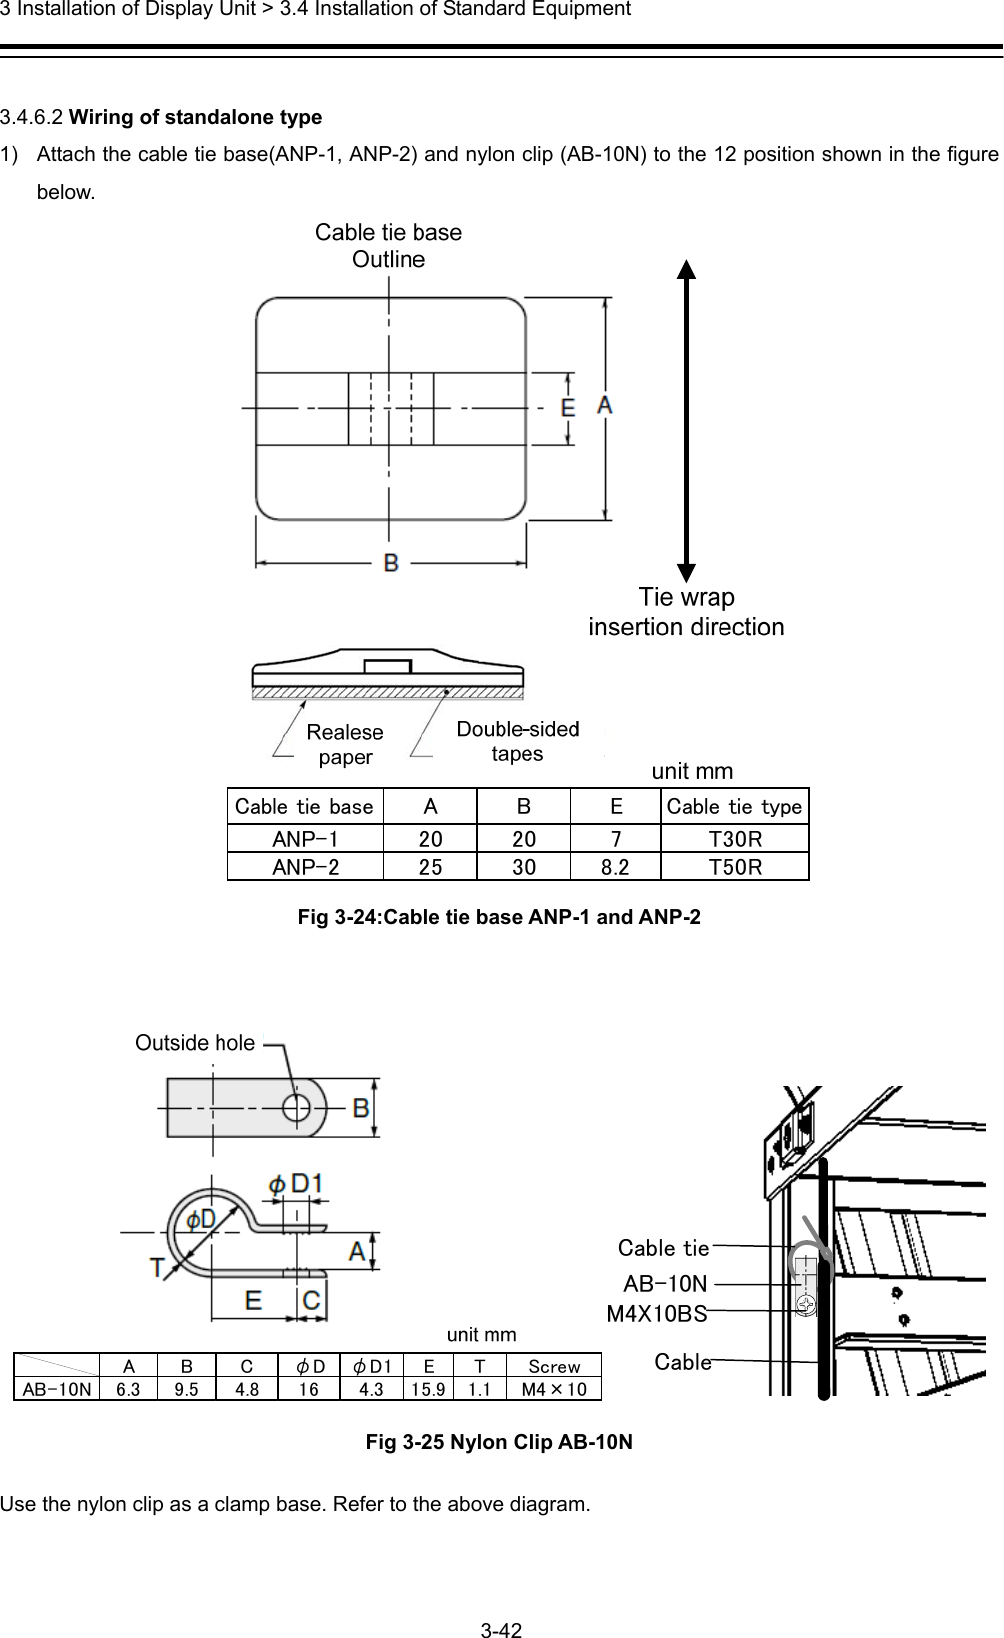  3 Installation of Display Unit &gt; 3.4 Installation of Standard Equipment 3-42   3.4.6.2 Wiring of standalone type 1)  Attach the cable tie base(ANP-1, ANP-2) and nylon clip (AB-10N) to the 12 position shown in the figure below. Cable tie base A B E Cable tie typeANP-1 20 20 7 T30RANP-2 25 30 8.2 T50R Fig 3-24:Cable tie base ANP-1 and ANP-2  ABCφDφD1ETScrewAB-10N 6.3 9.5 4.8 16 4.3 15.9 1.1 M4×10CableAB-10NCable tieM4X10BS Fig 3-25 Nylon Clip AB-10N Use the nylon clip as a clamp base. Refer to the above diagram. 